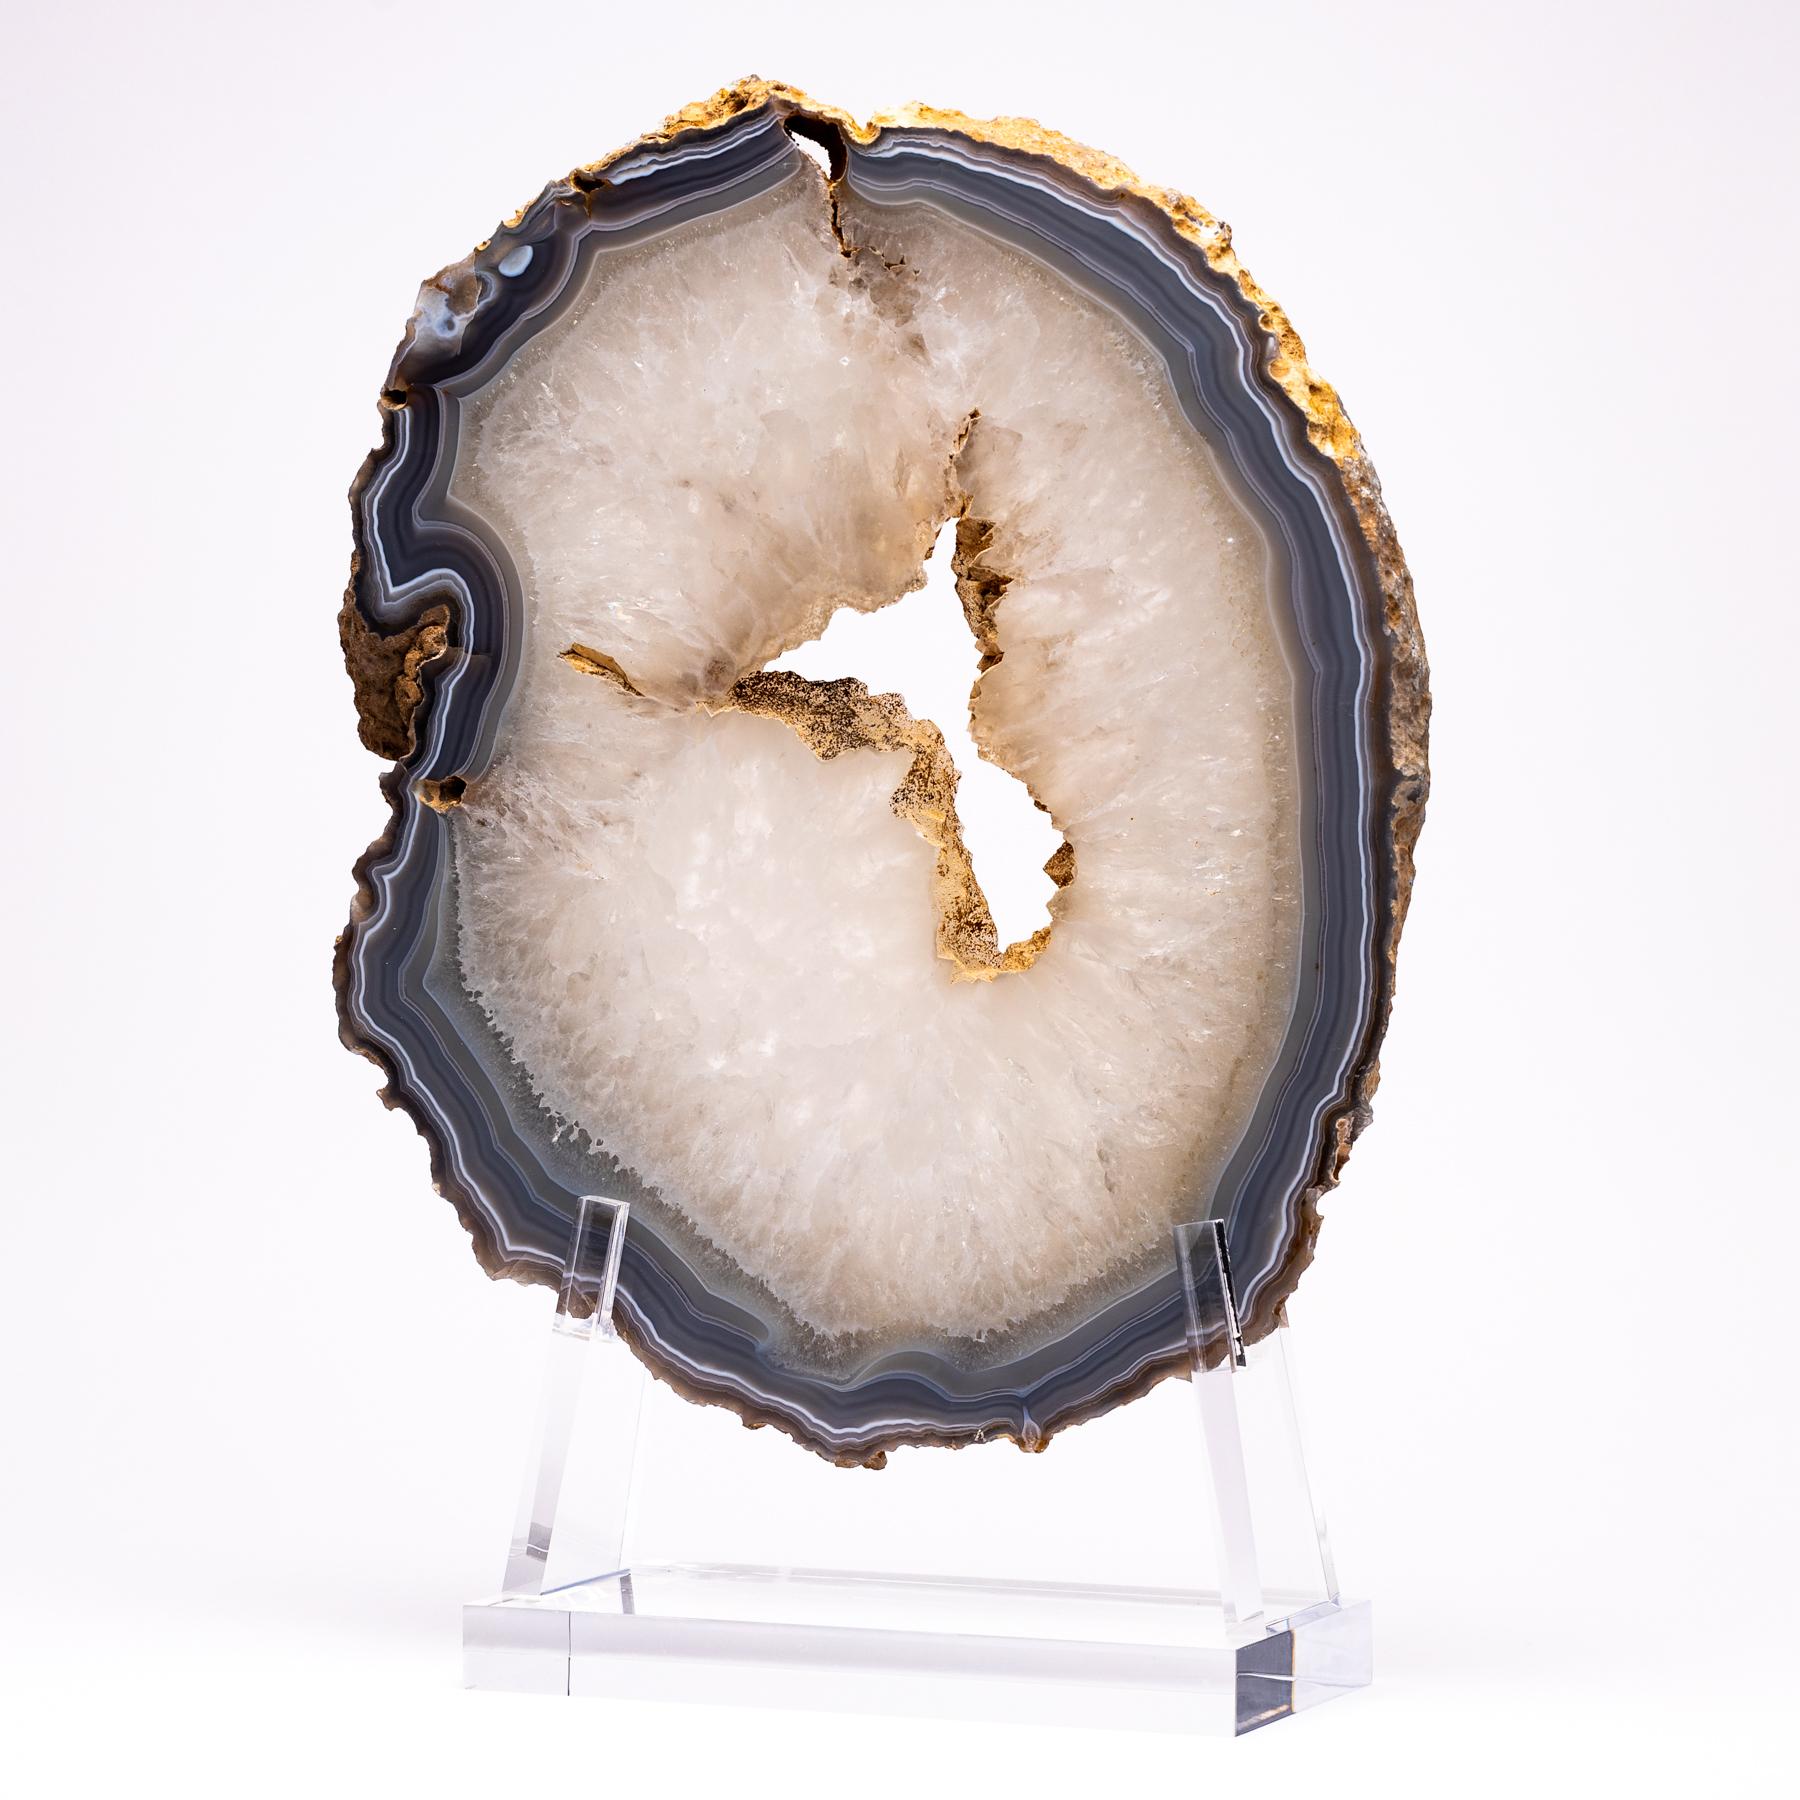 Top grade agate slab from Brazil
Agates are formed in rounded nodules, which are sliced open to bring out the internal pattern hidden in the stone. Their formation is commonly from depositions of layers of silica filling voids in volcanic vesicles